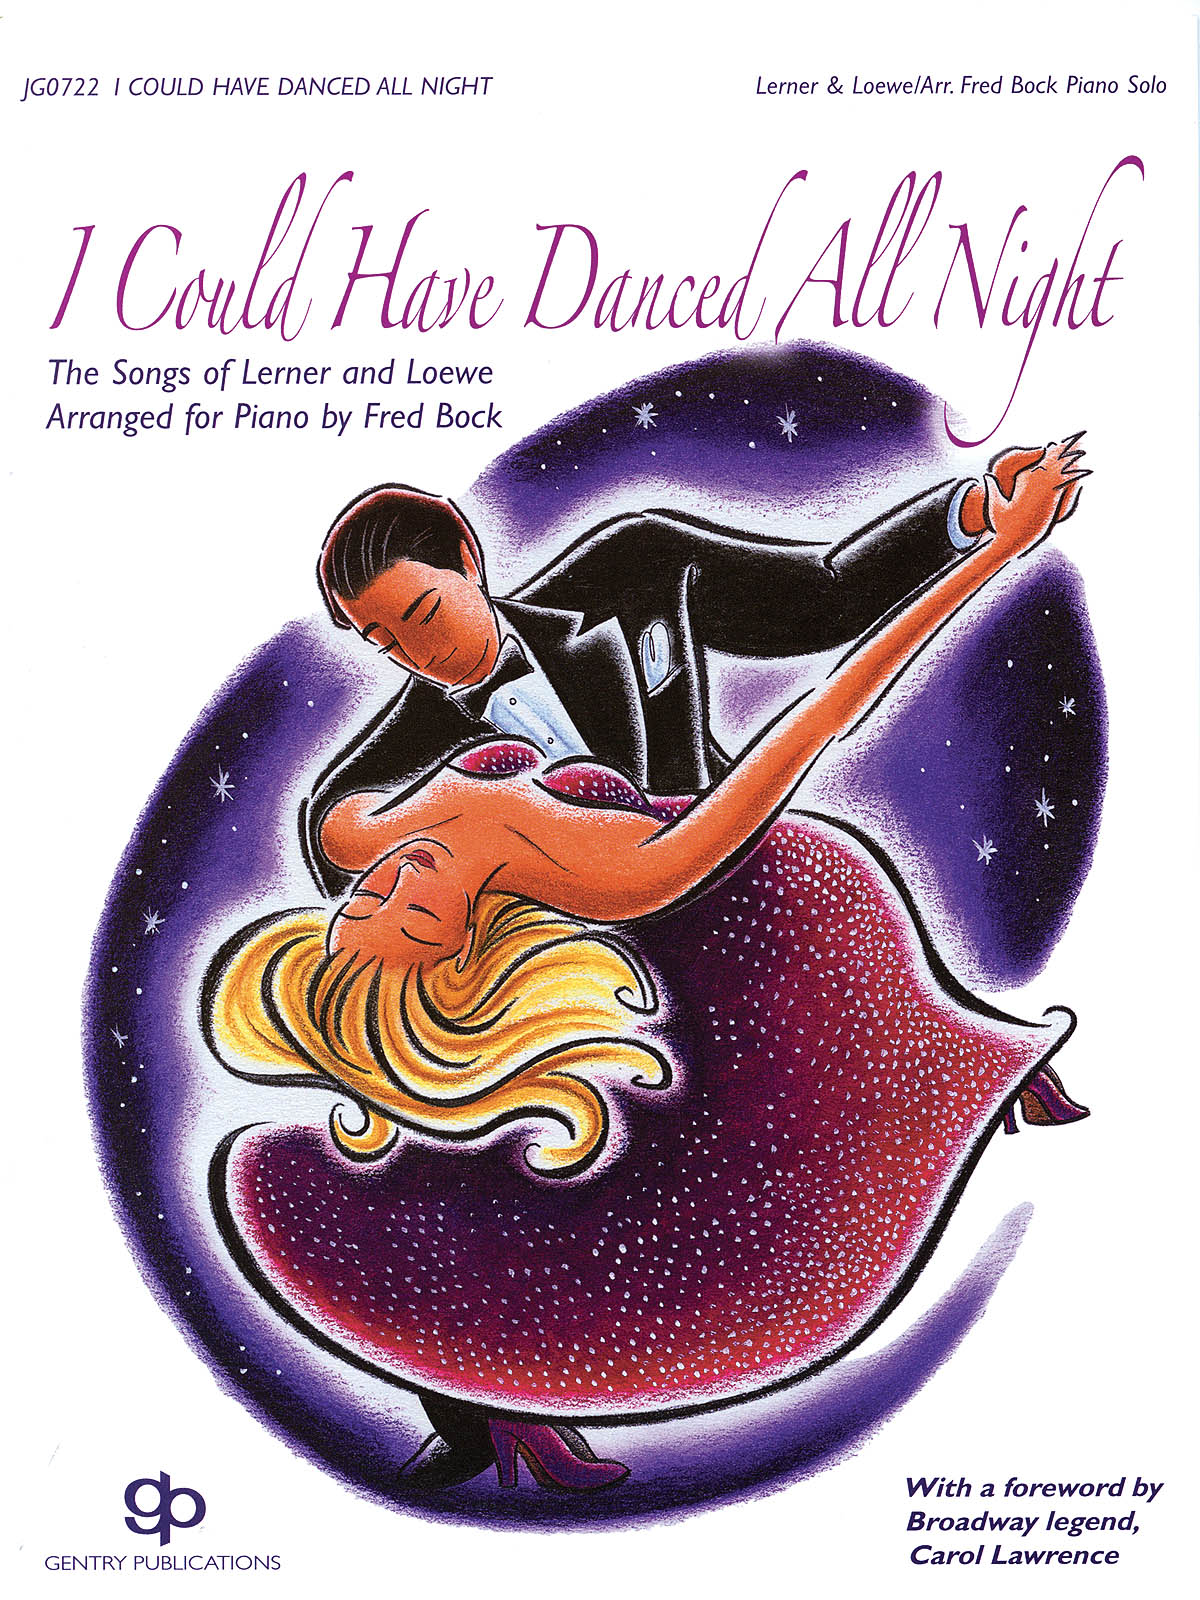 Alan Jay Lerner Frederick Loewe: I Could Have Danced All Night: Piano: